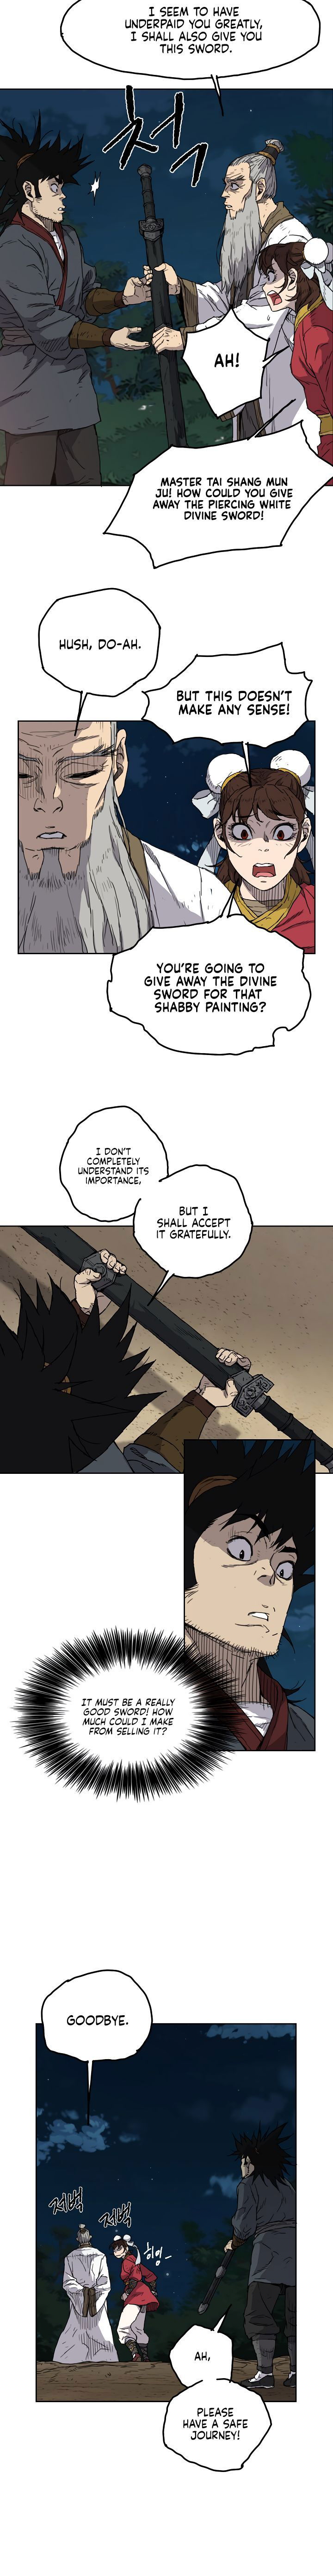 The Undefeatable Swordsman Chapter 004 page 4